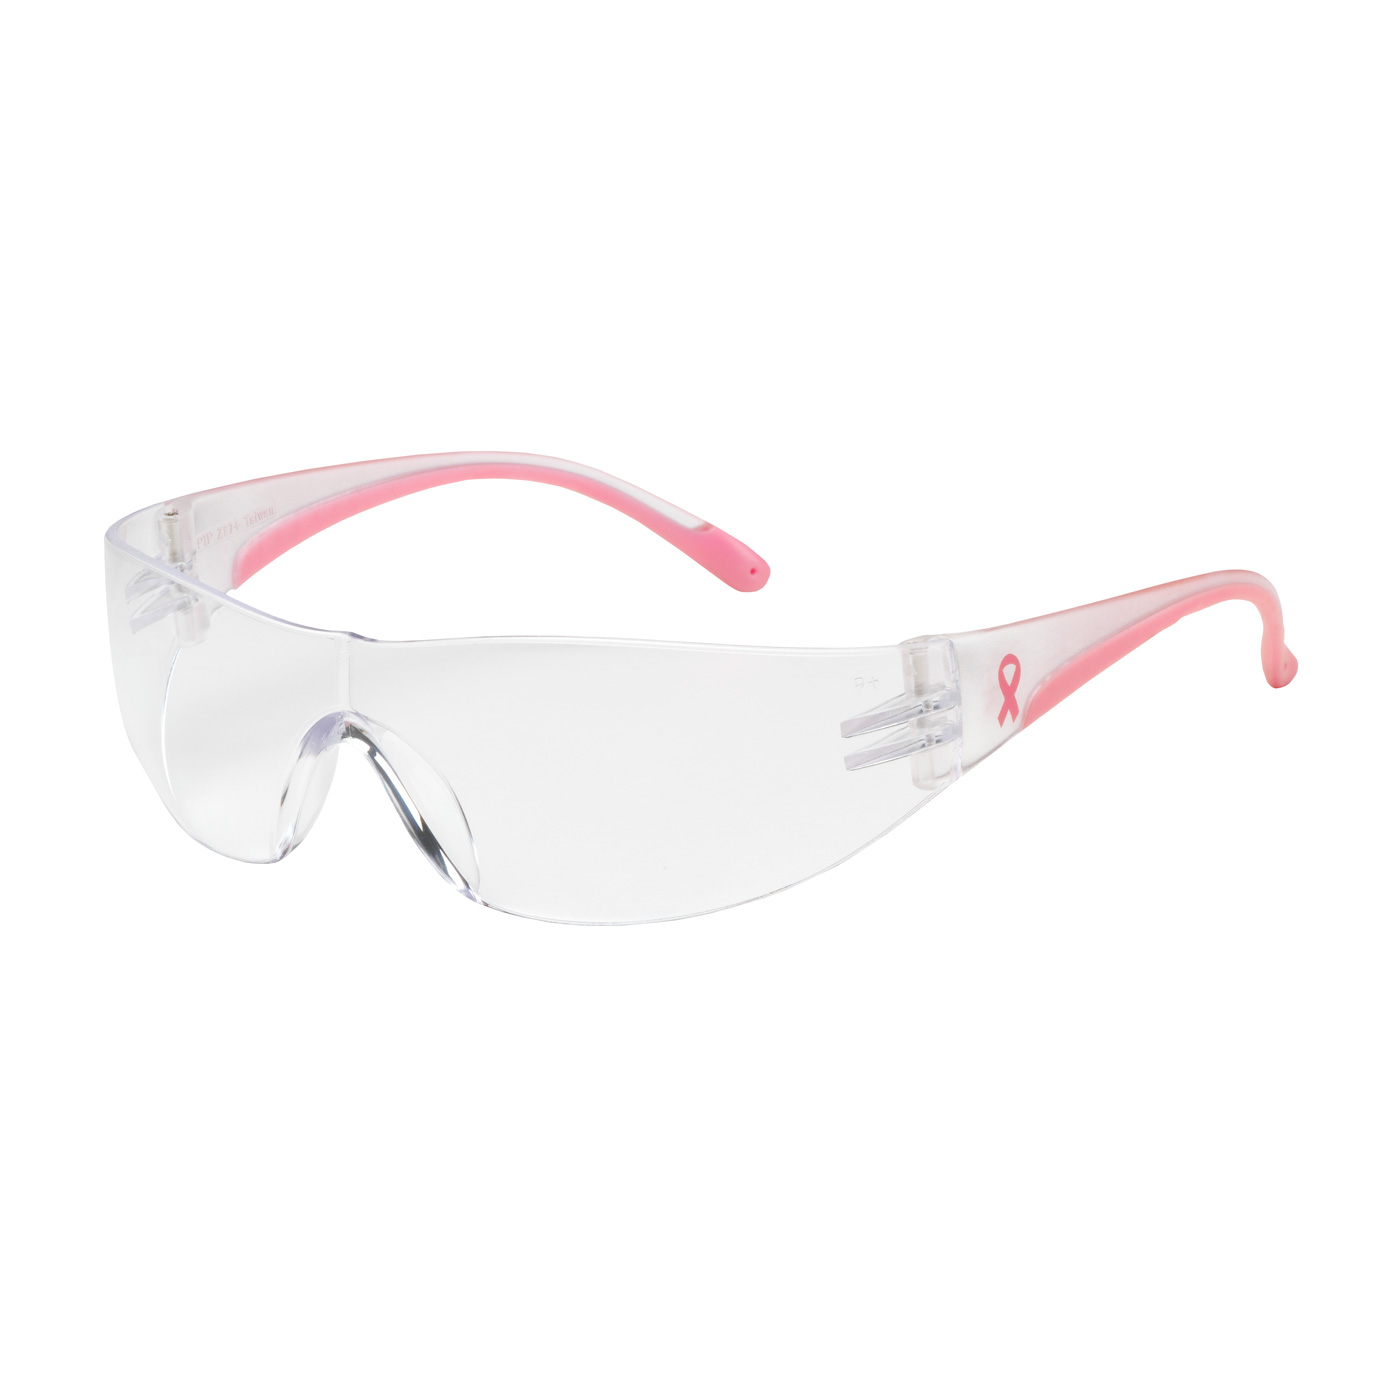 PPE Safety Glasses